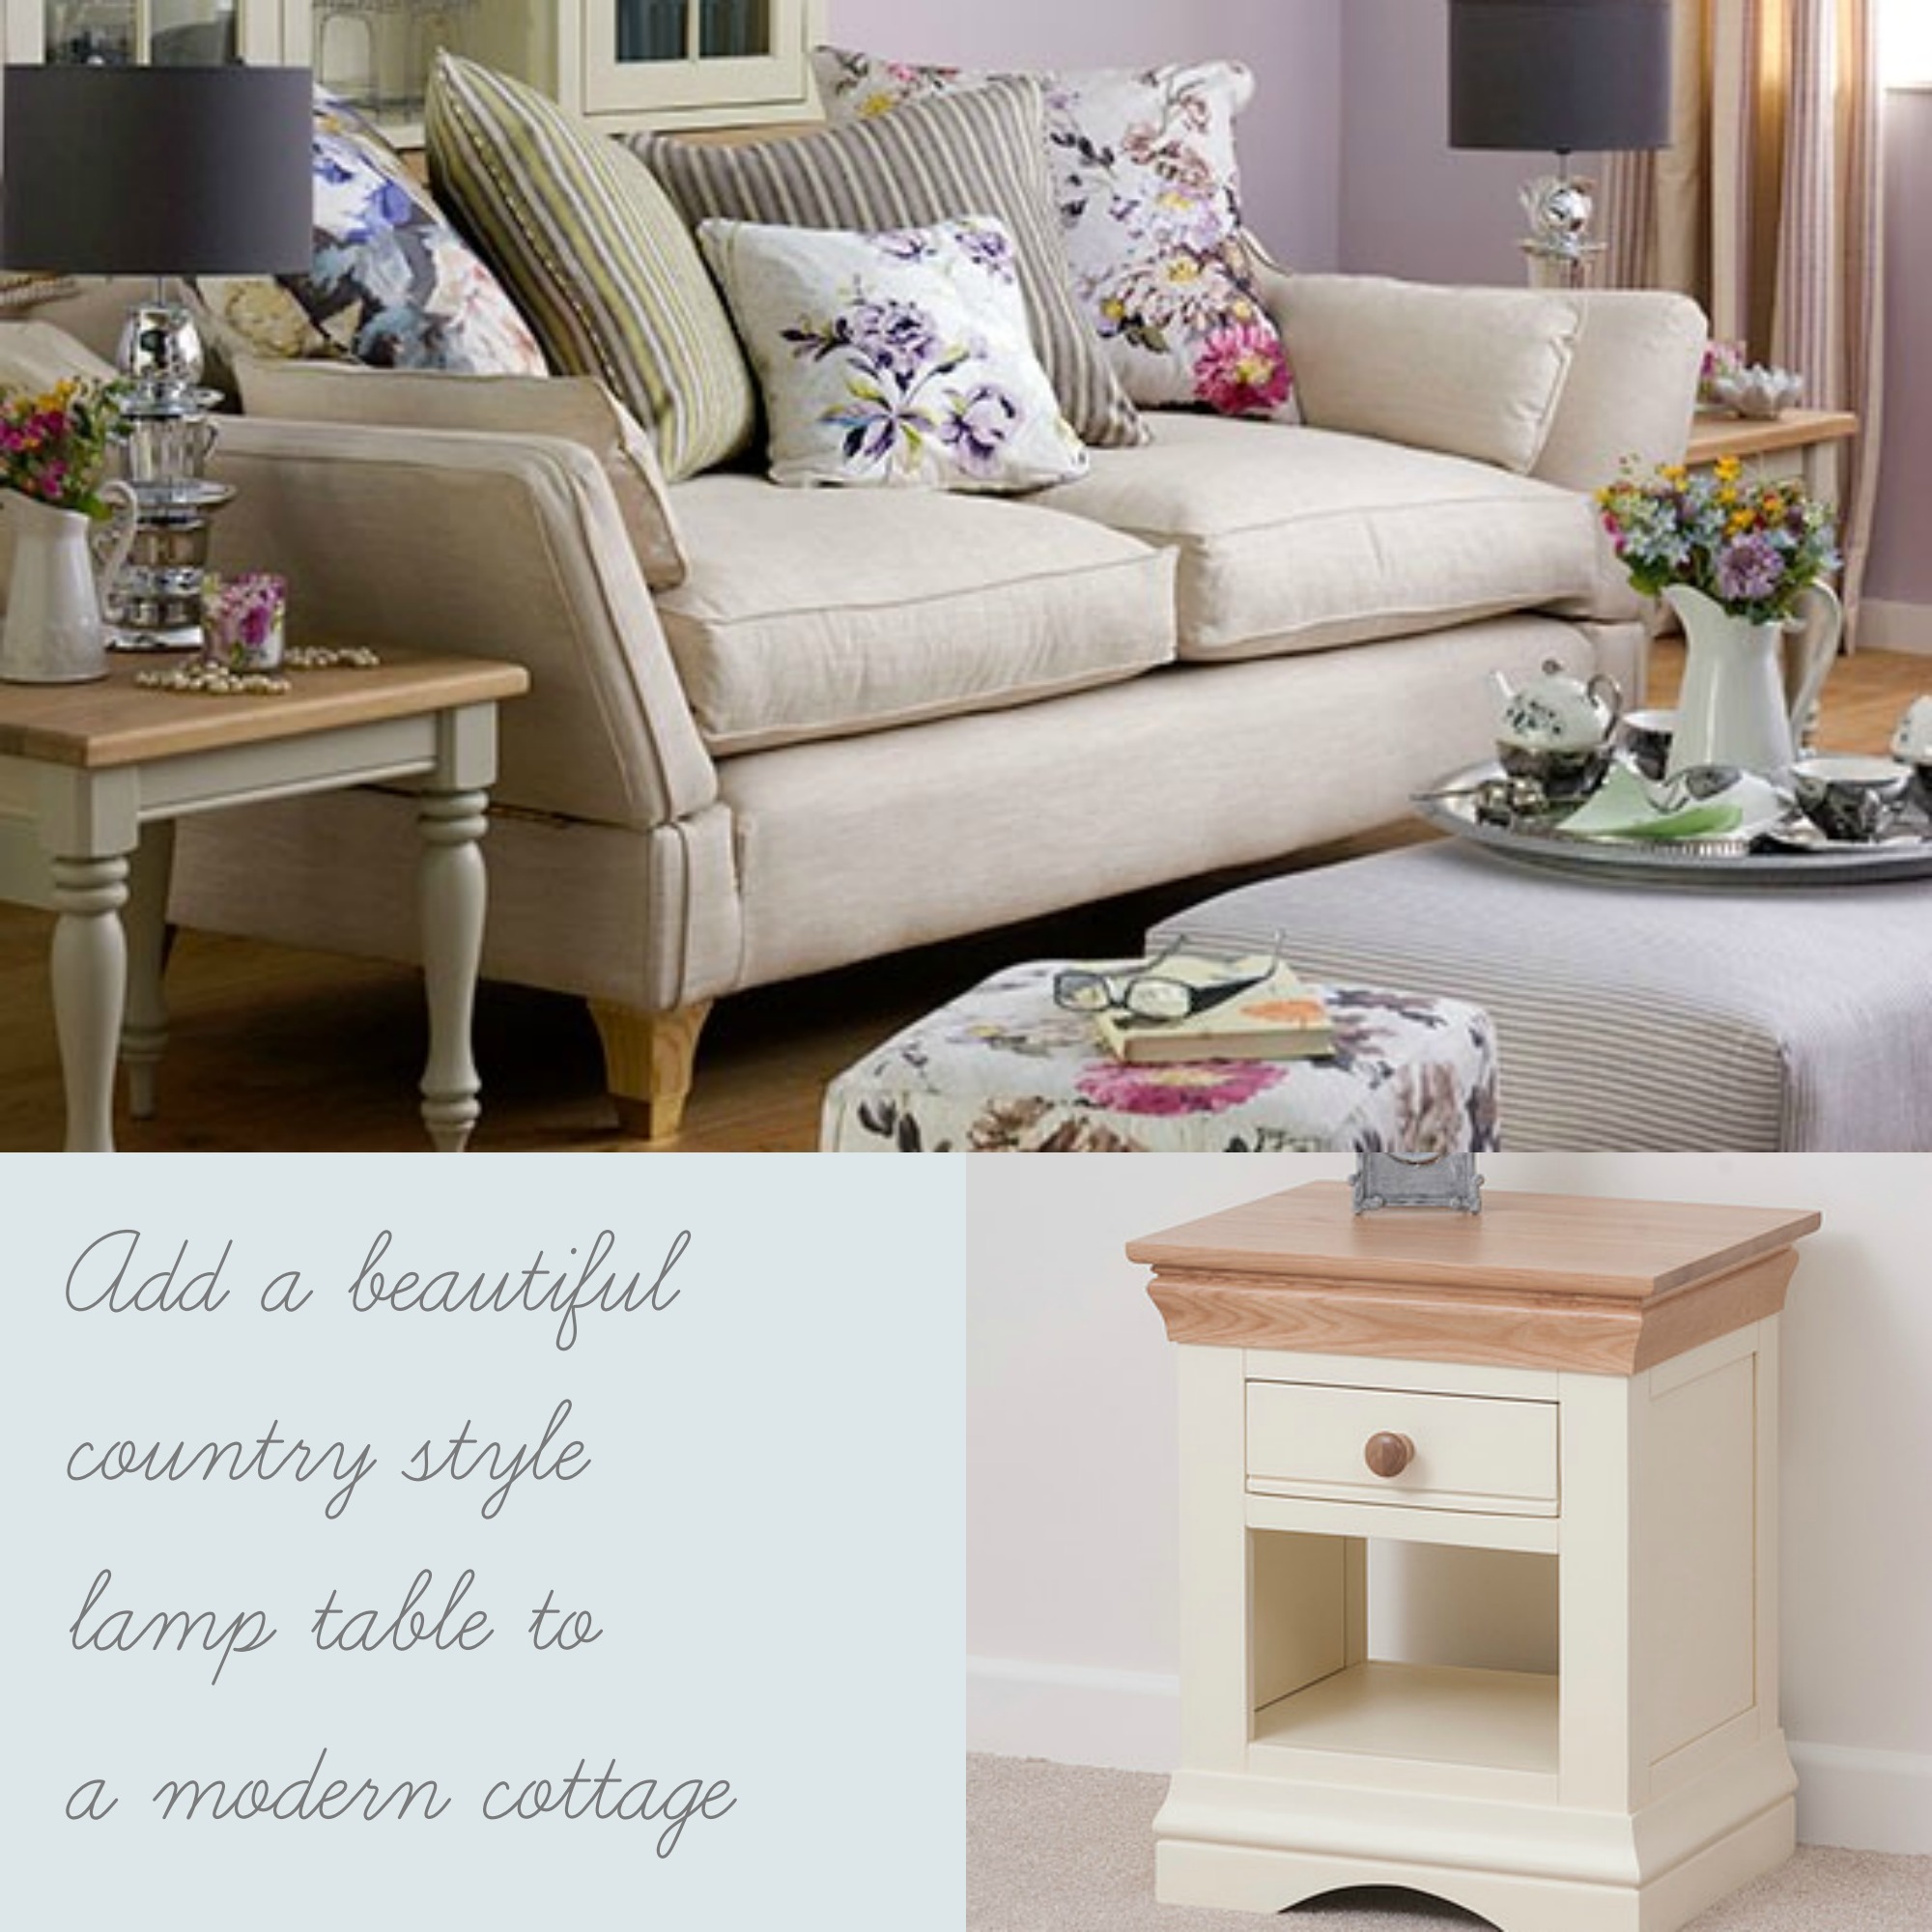 A Style Guide To Lamp Tables By Jen Stanbrook The Oak Furniture